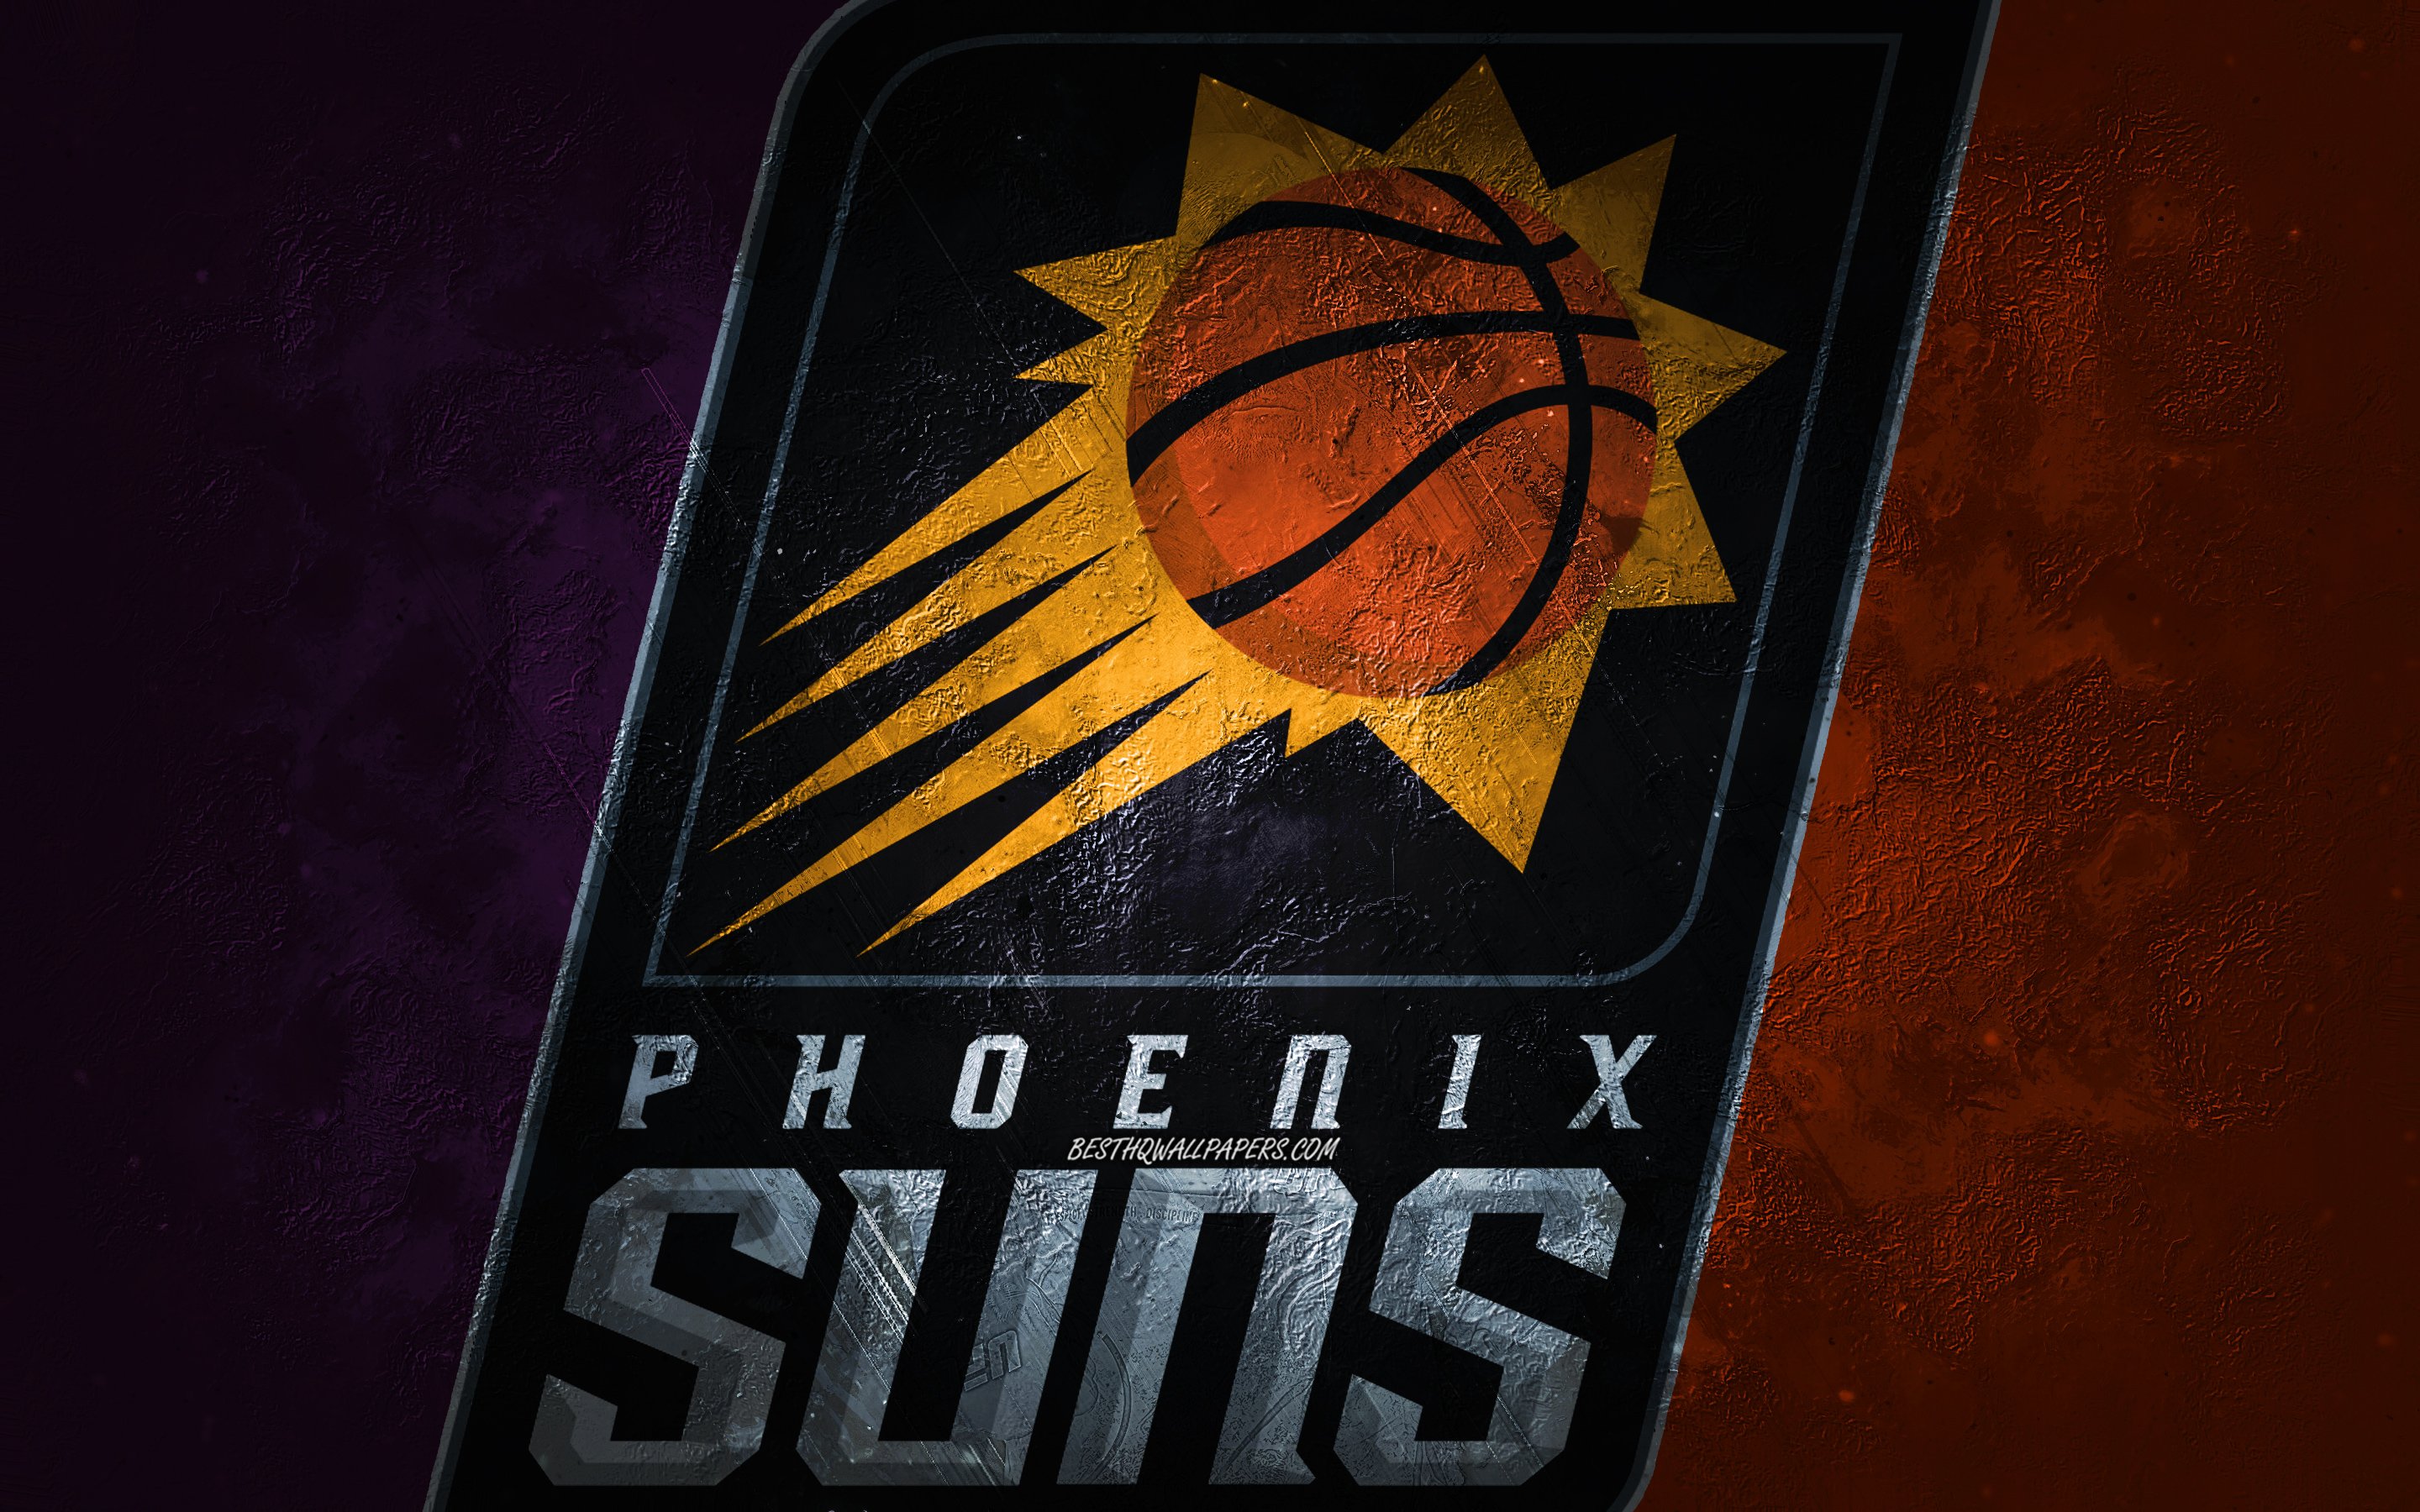 Download wallpaper Phoenix Suns, American basketball team, purple orange stone background, Phoenix Suns logo, grunge art, NBA, basketball, USA, Phoenix Suns emblem for desktop with resolution 2880x1800. High Quality HD picture wallpaper